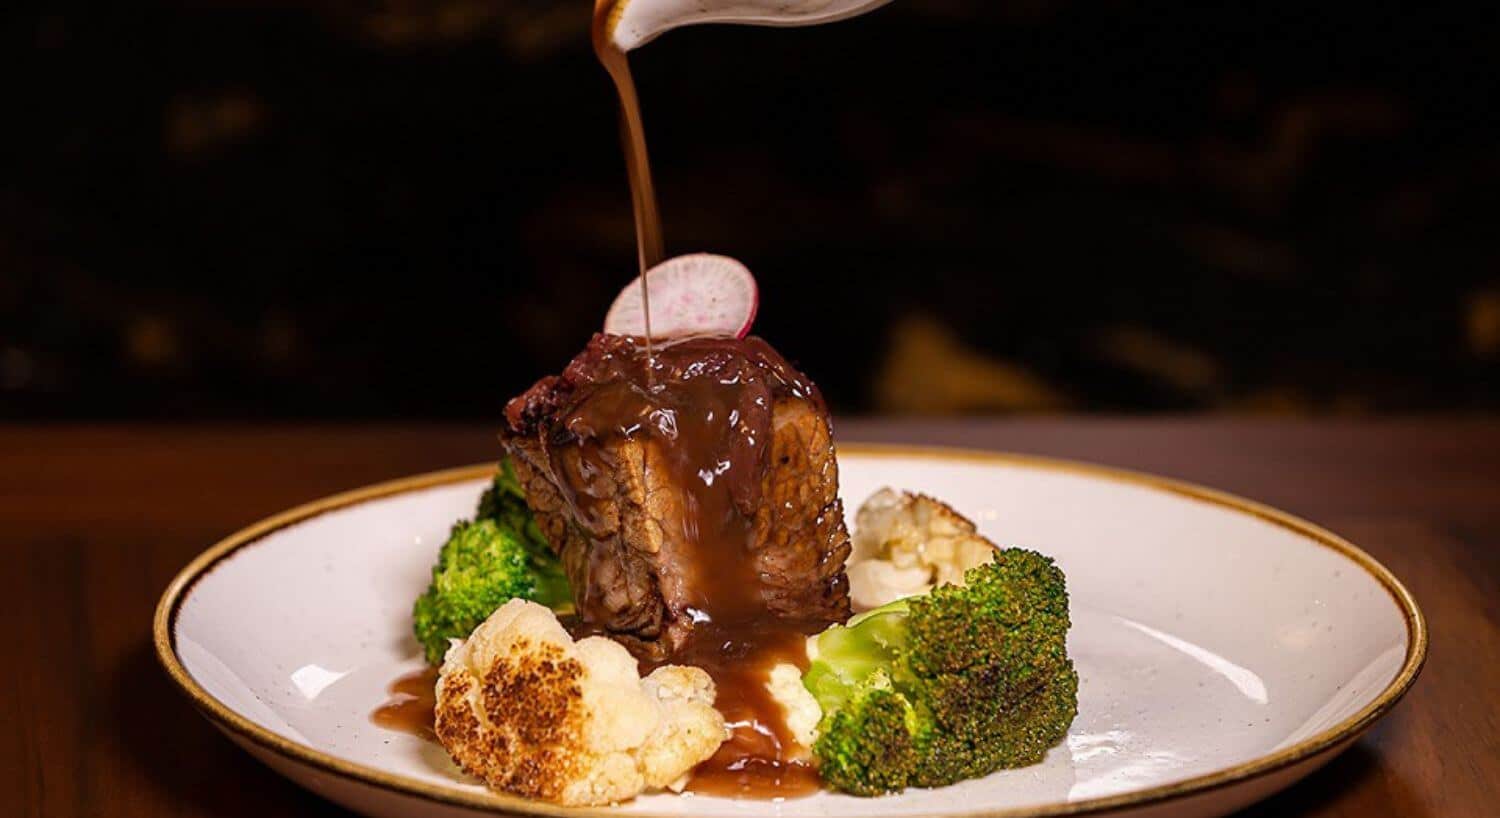 A white plate with a piece of filet steak atop a mound of mashed potatoes, with grilled broccoli and cauliflower pieces around it, and a brown gravy drizzled on the meat.